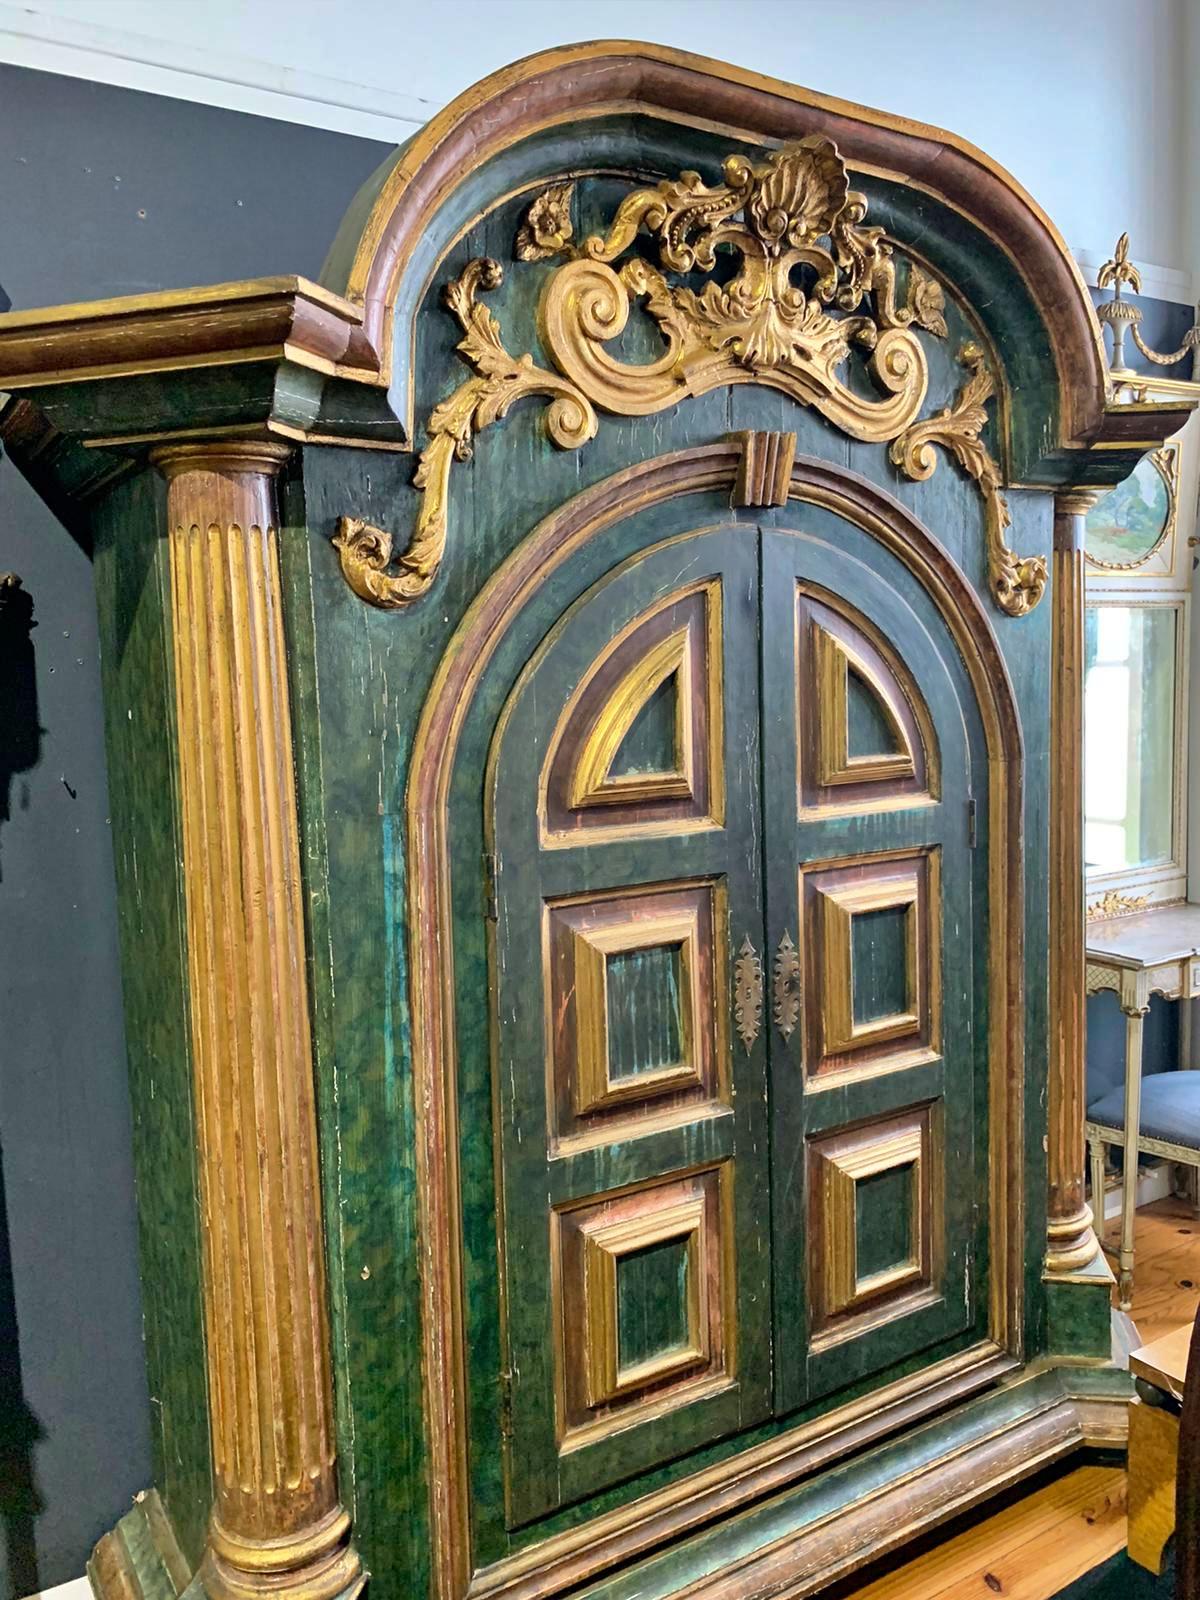 Magnificent and rare sacristy mobile, 18th century
In painted and gilded wood, with two cushioned doors. Decorated with a carving element represented by a vegetable motif. Interior with three drawers and shelf, back and sides lined with fabric.